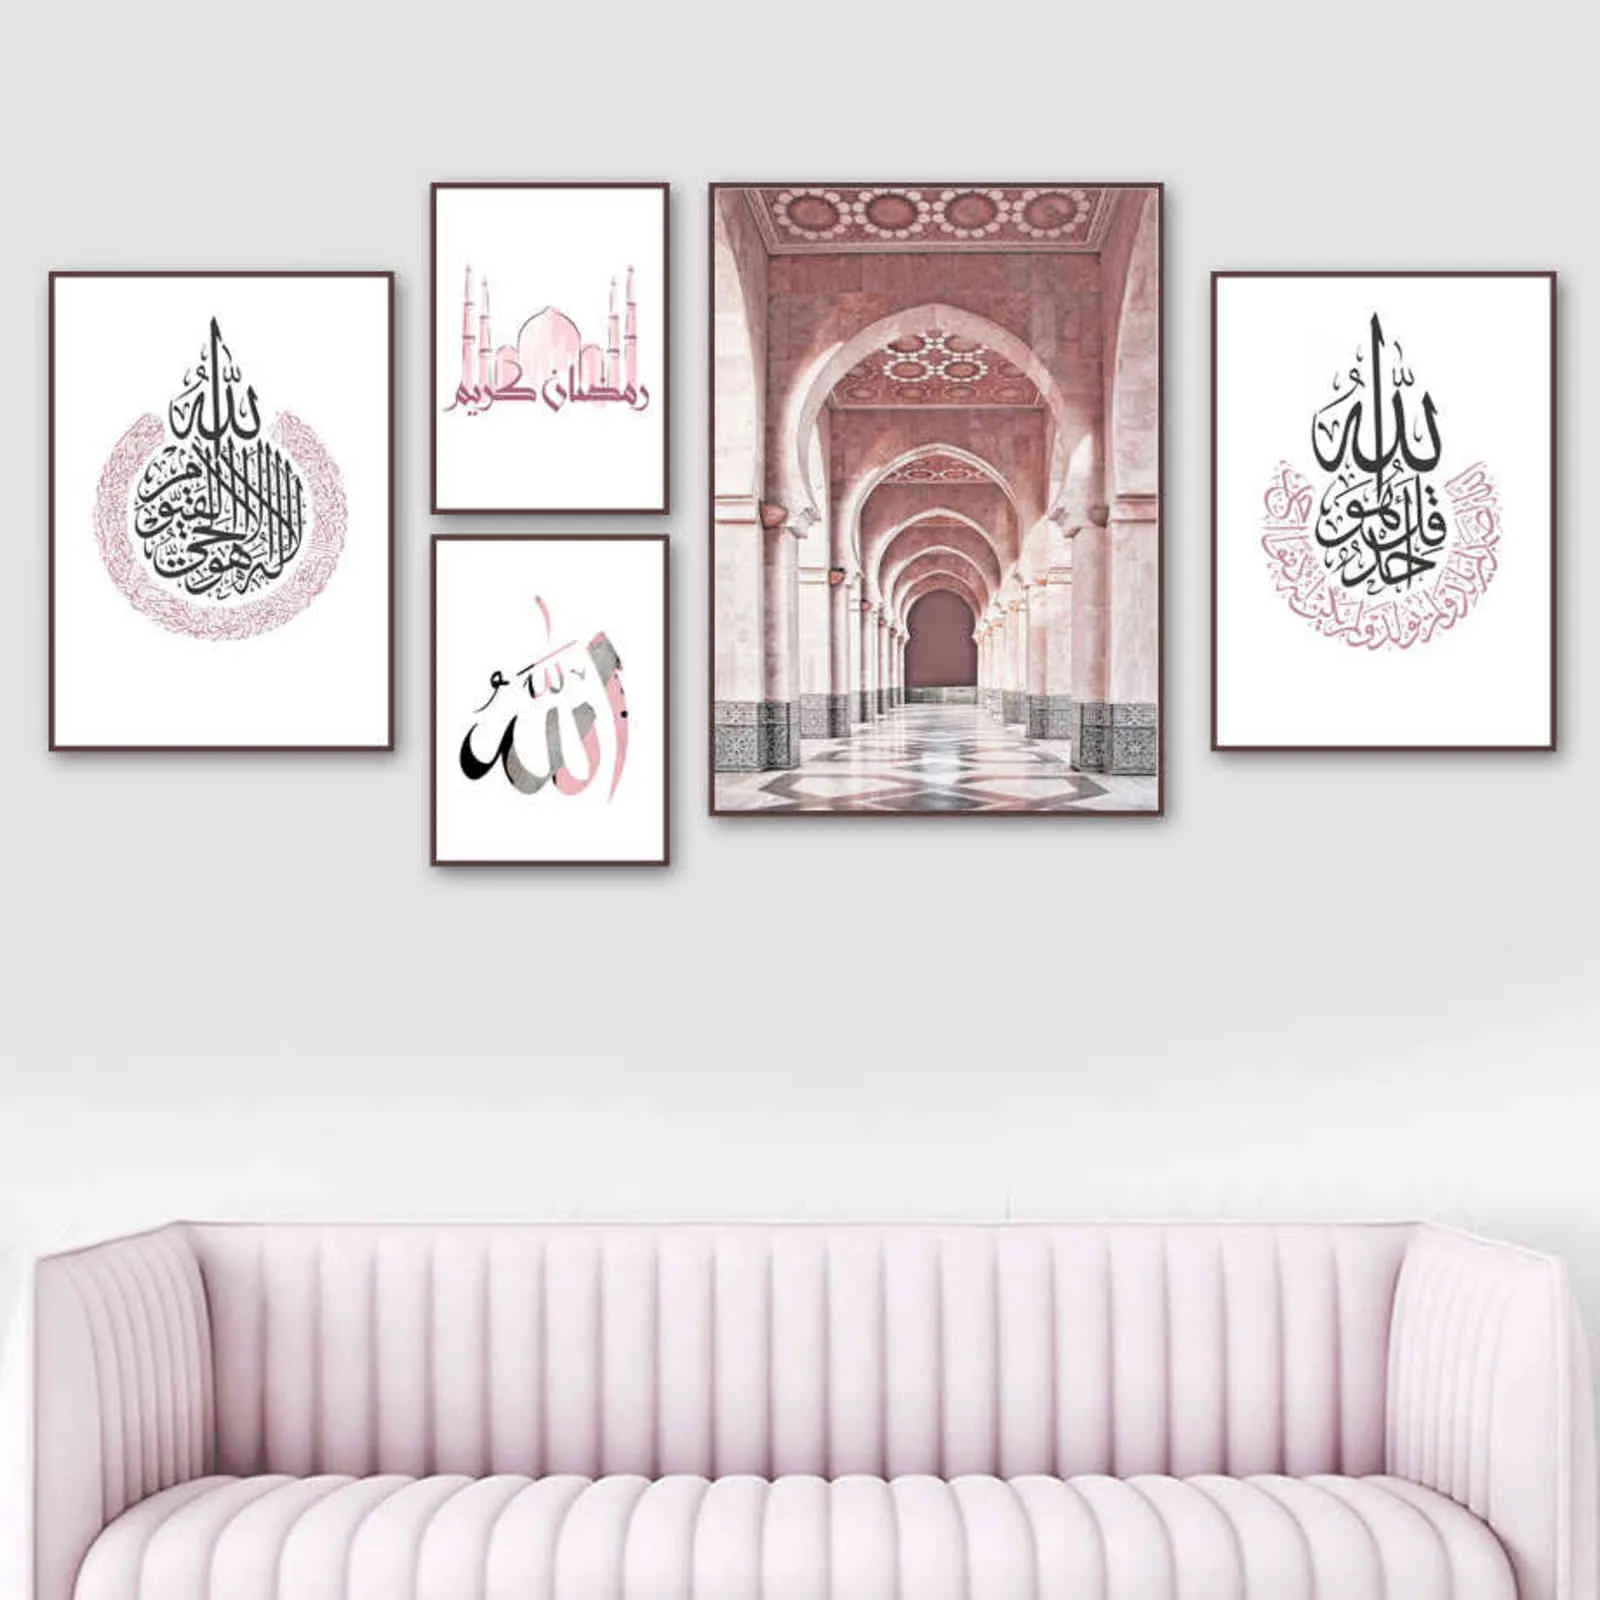 Moroccan Mosque Arabic Calligraphy Islamic Poster Wall Art Print Canvas Painting Nordic Wall Pictures For Living Room Decoration H1110